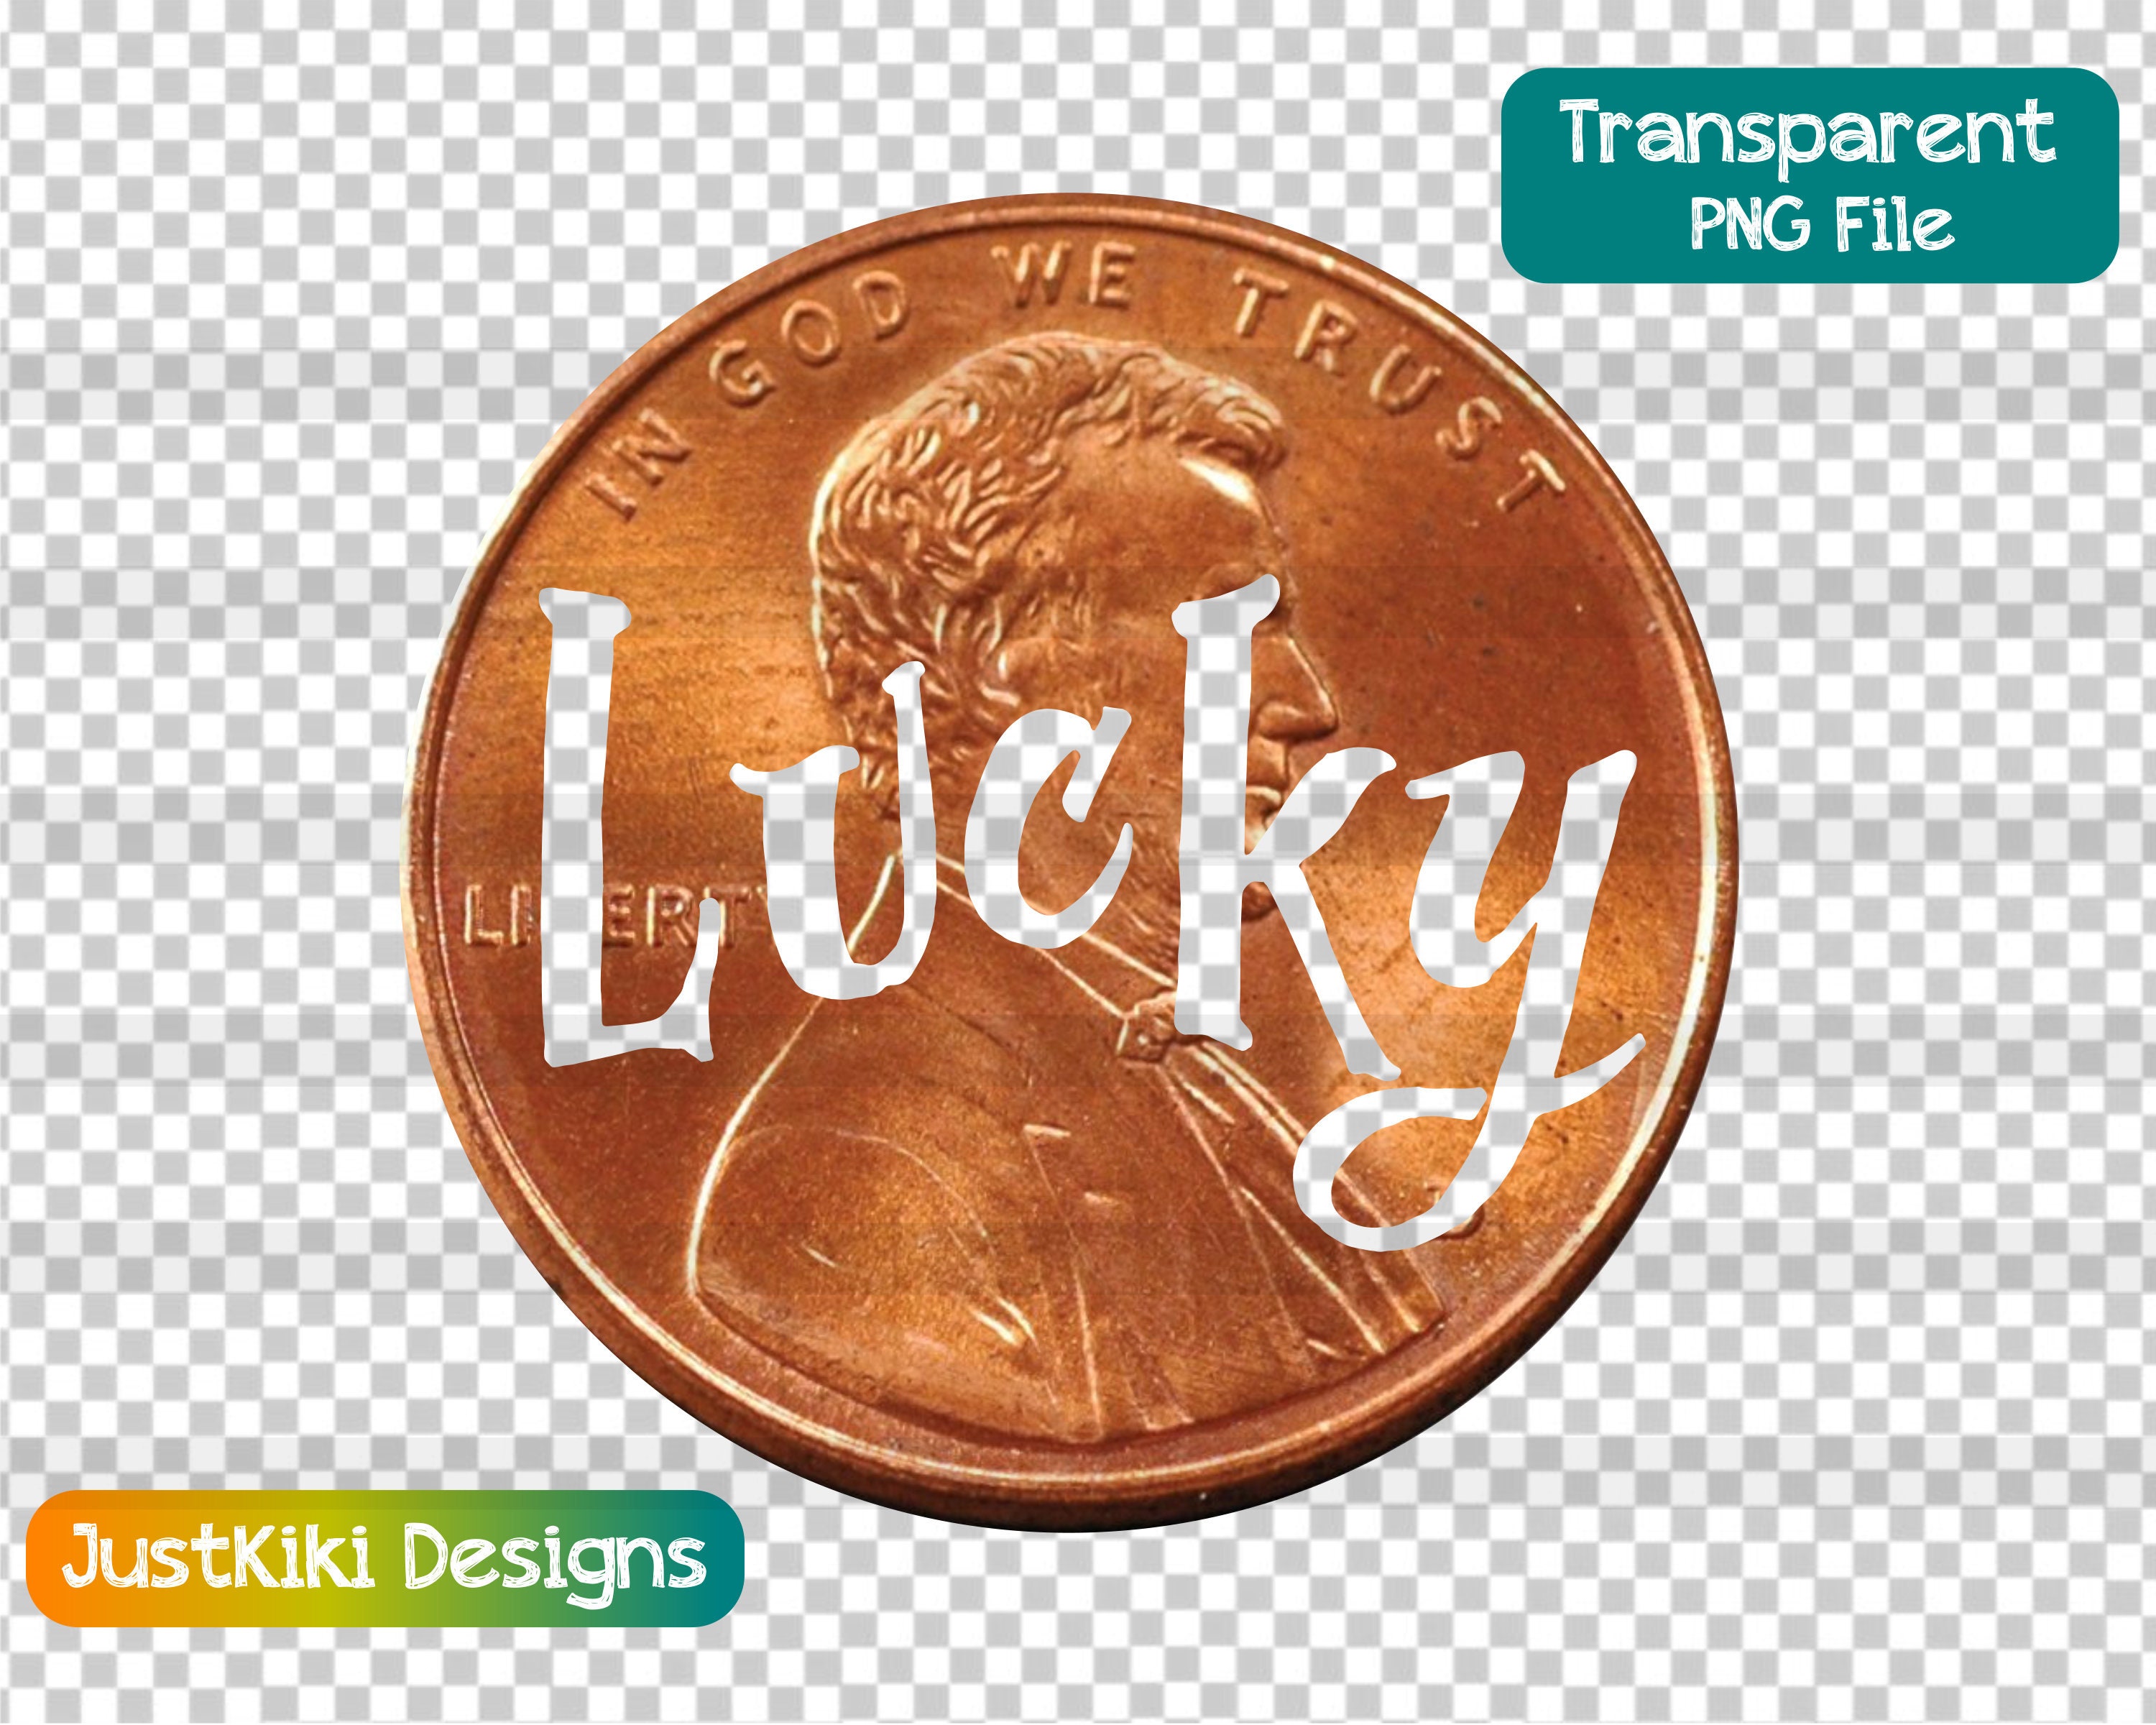 3. Lucky Penny Tattoo - wide 1